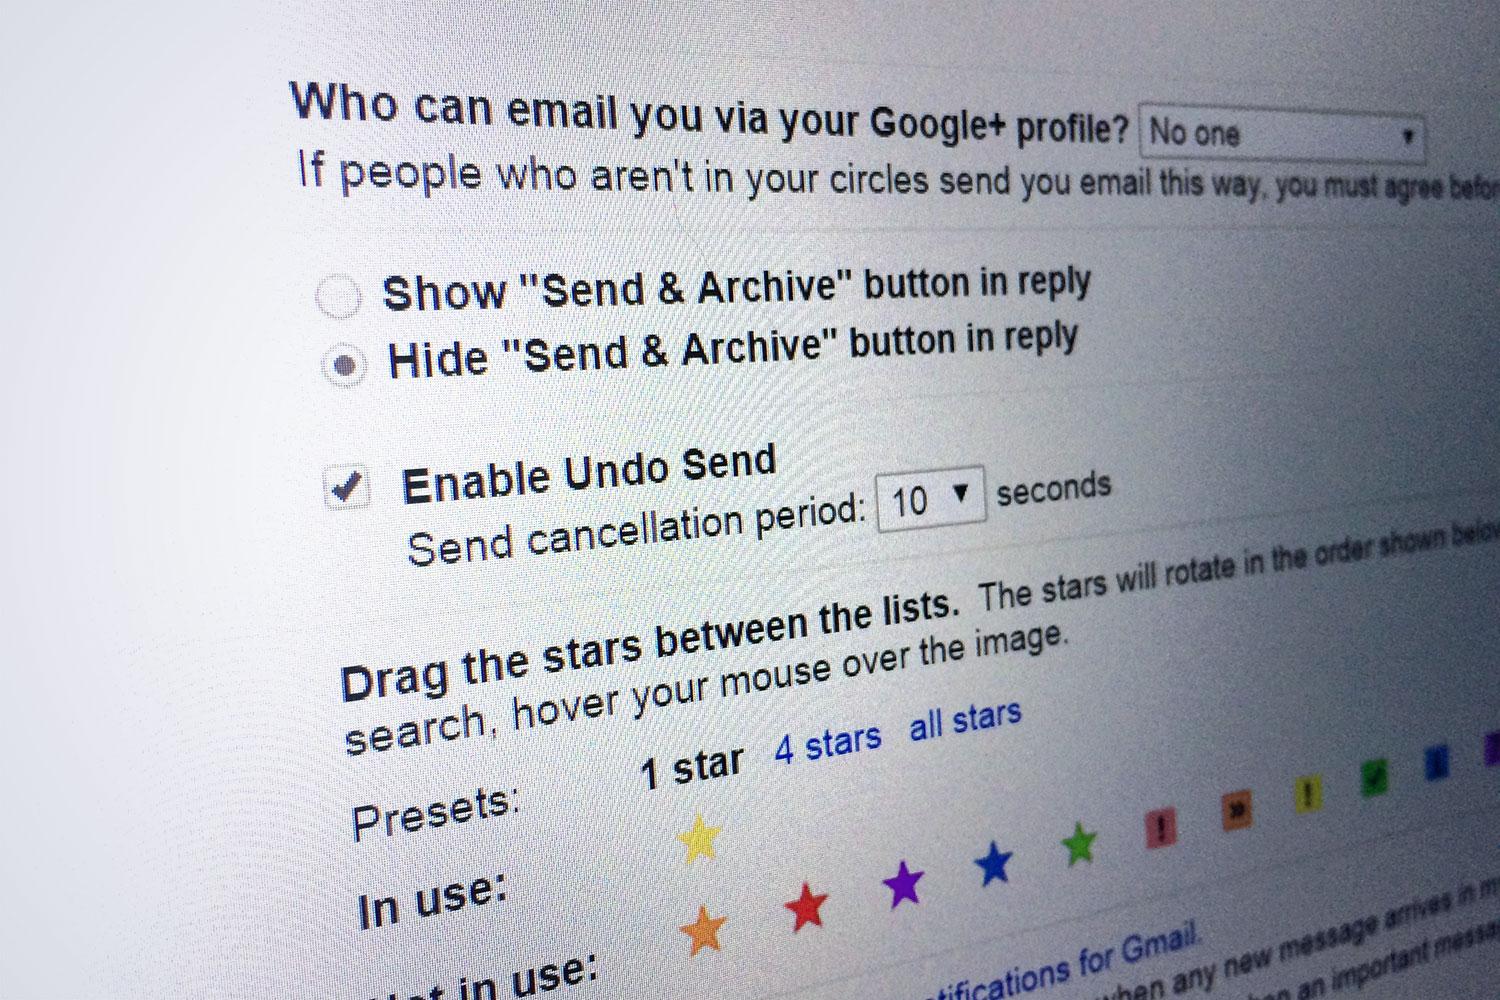 Top 10 Tips to Help You Get a Better Grip on Gmail - CNET